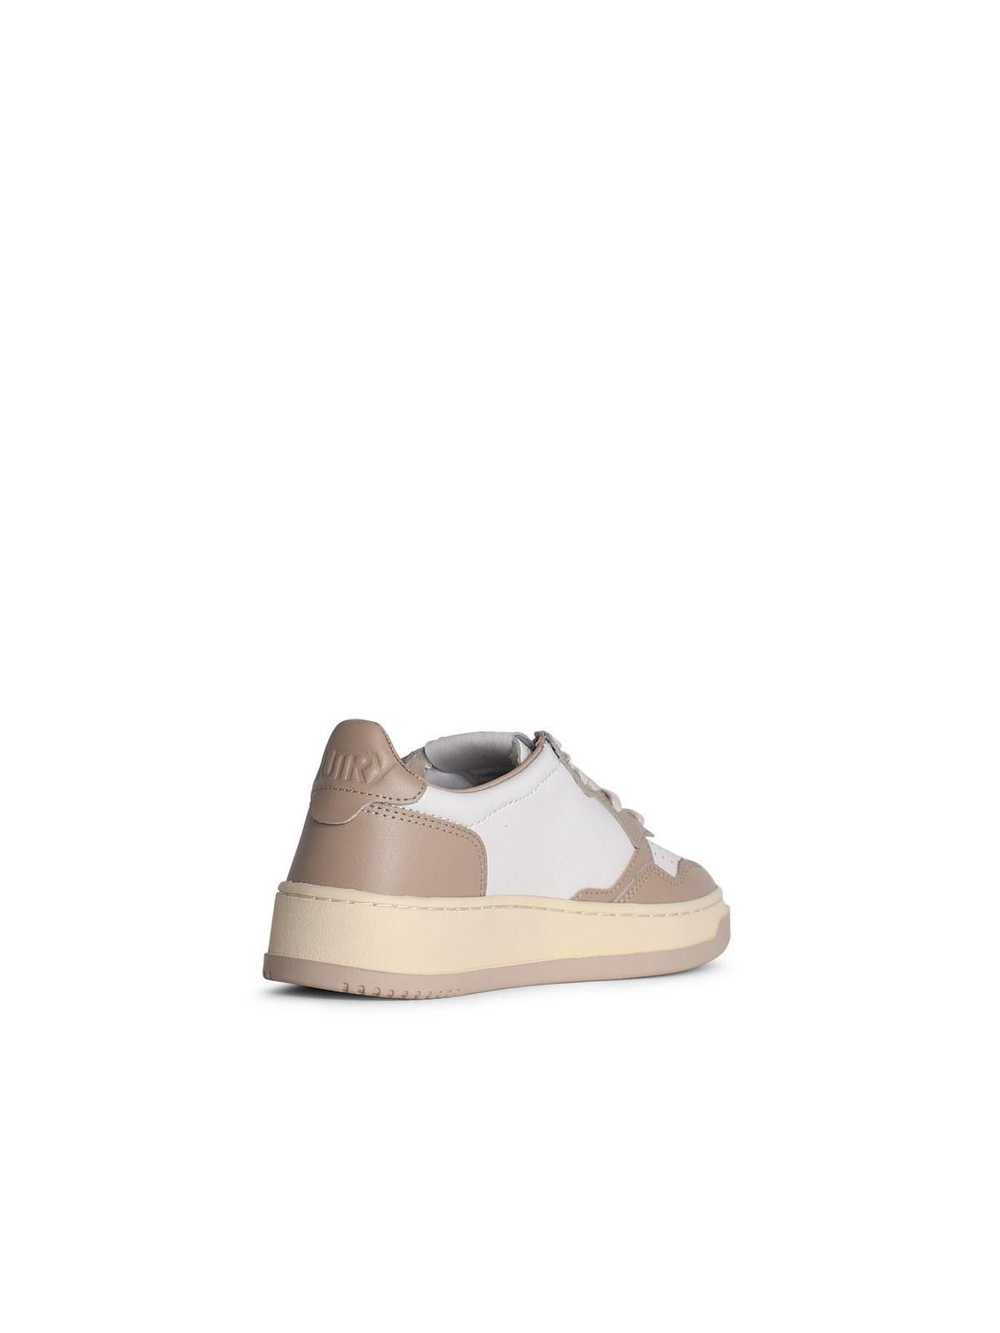 Autry Autry 'medalist' White Leather Sneakers - image 3